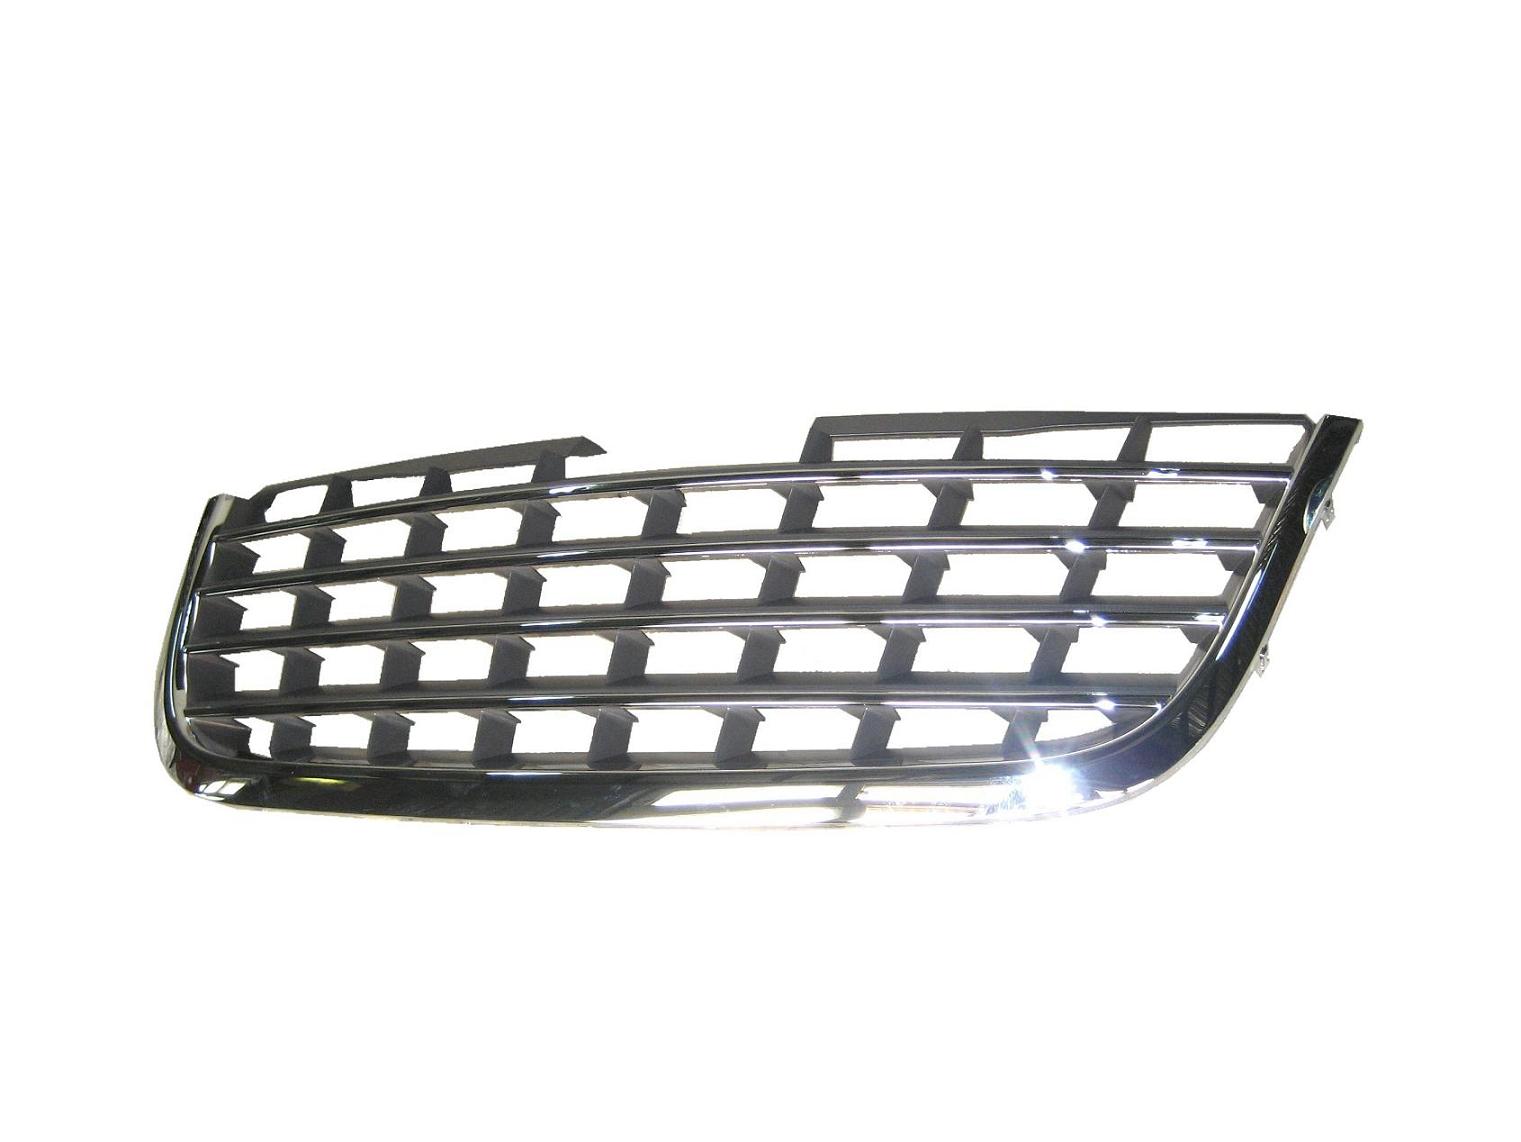 Aftermarket GRILLES for CHRYSLER - TOWN & COUNTRY, TOWN & COUNTRY,08-10,Grille assy